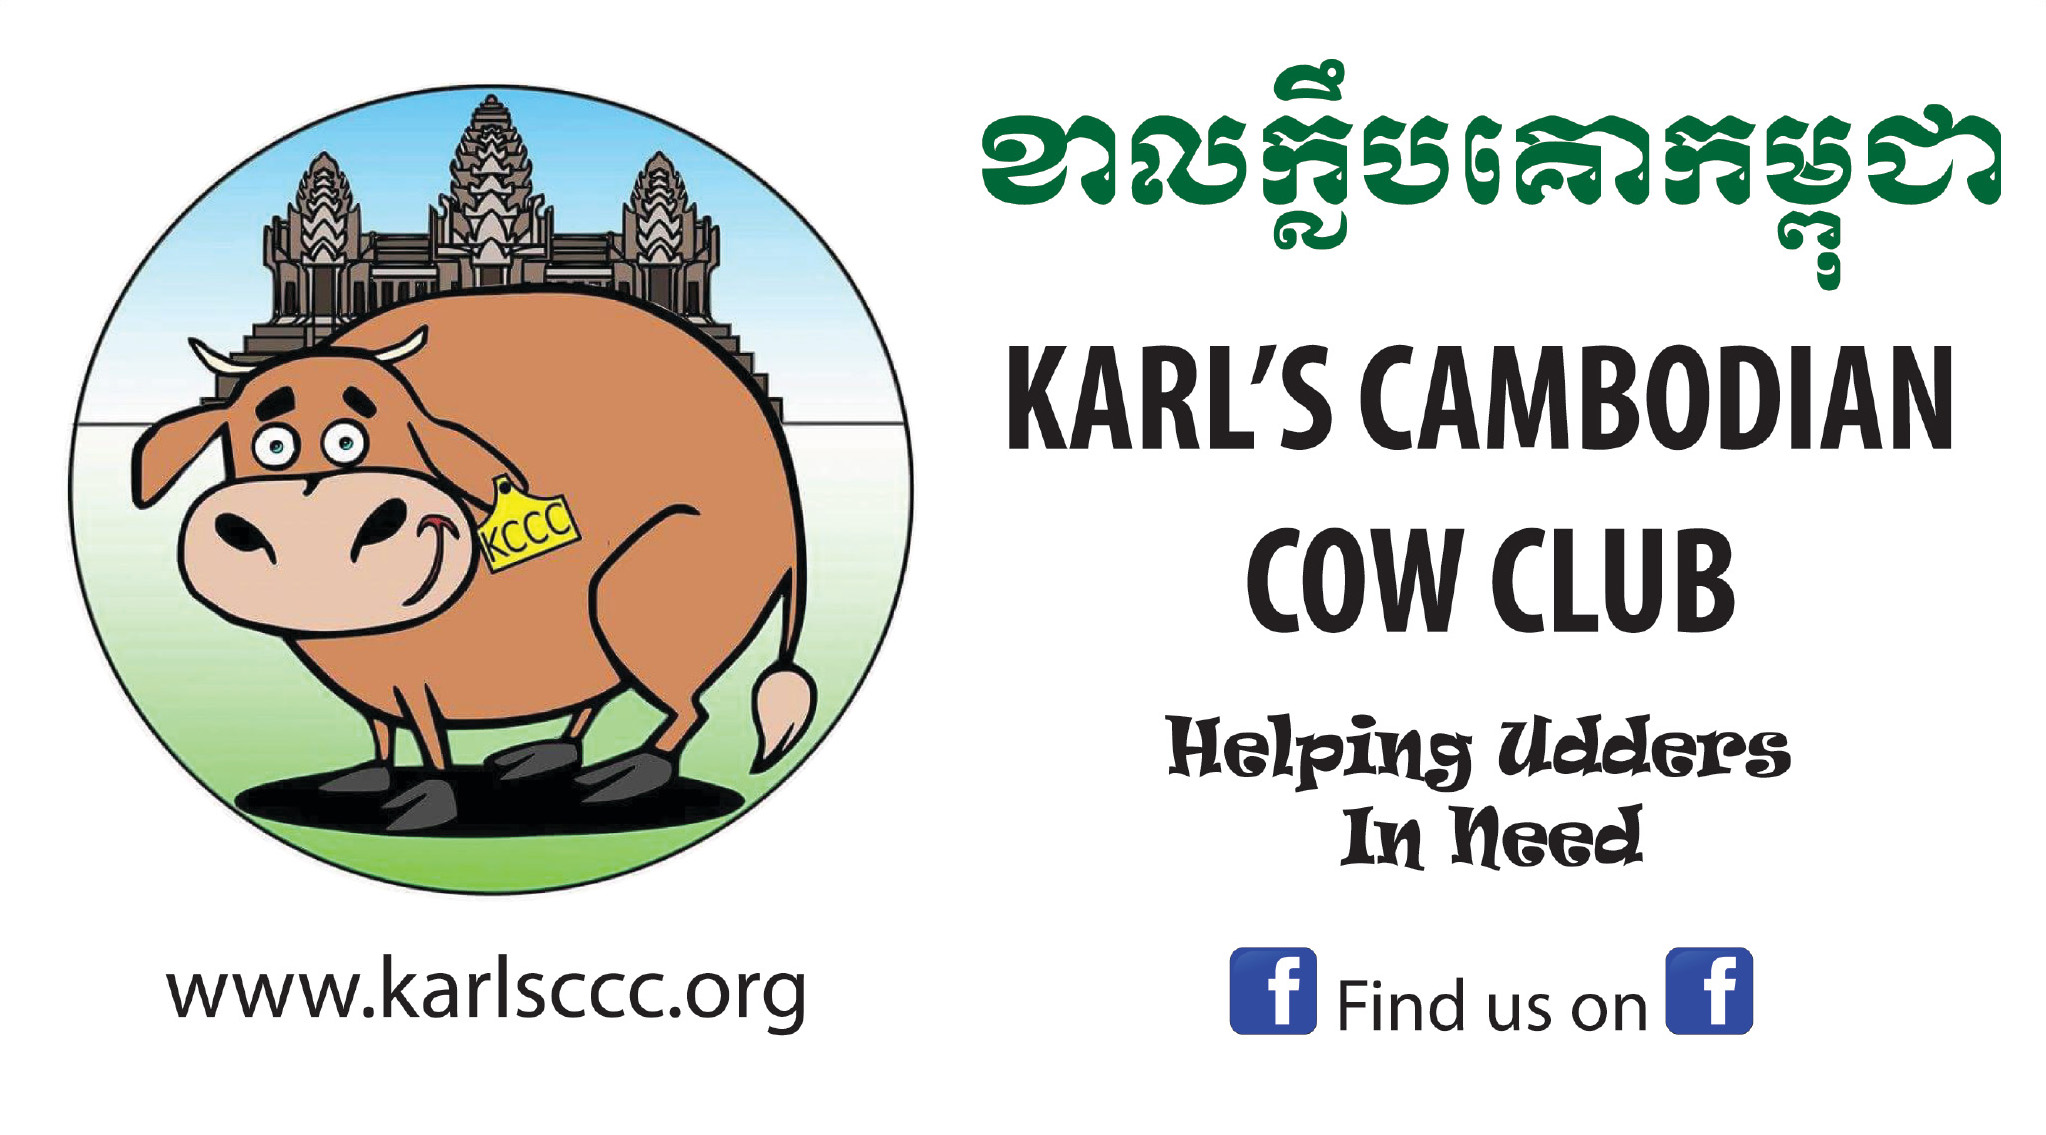 Karl's Cambodian Cow Club